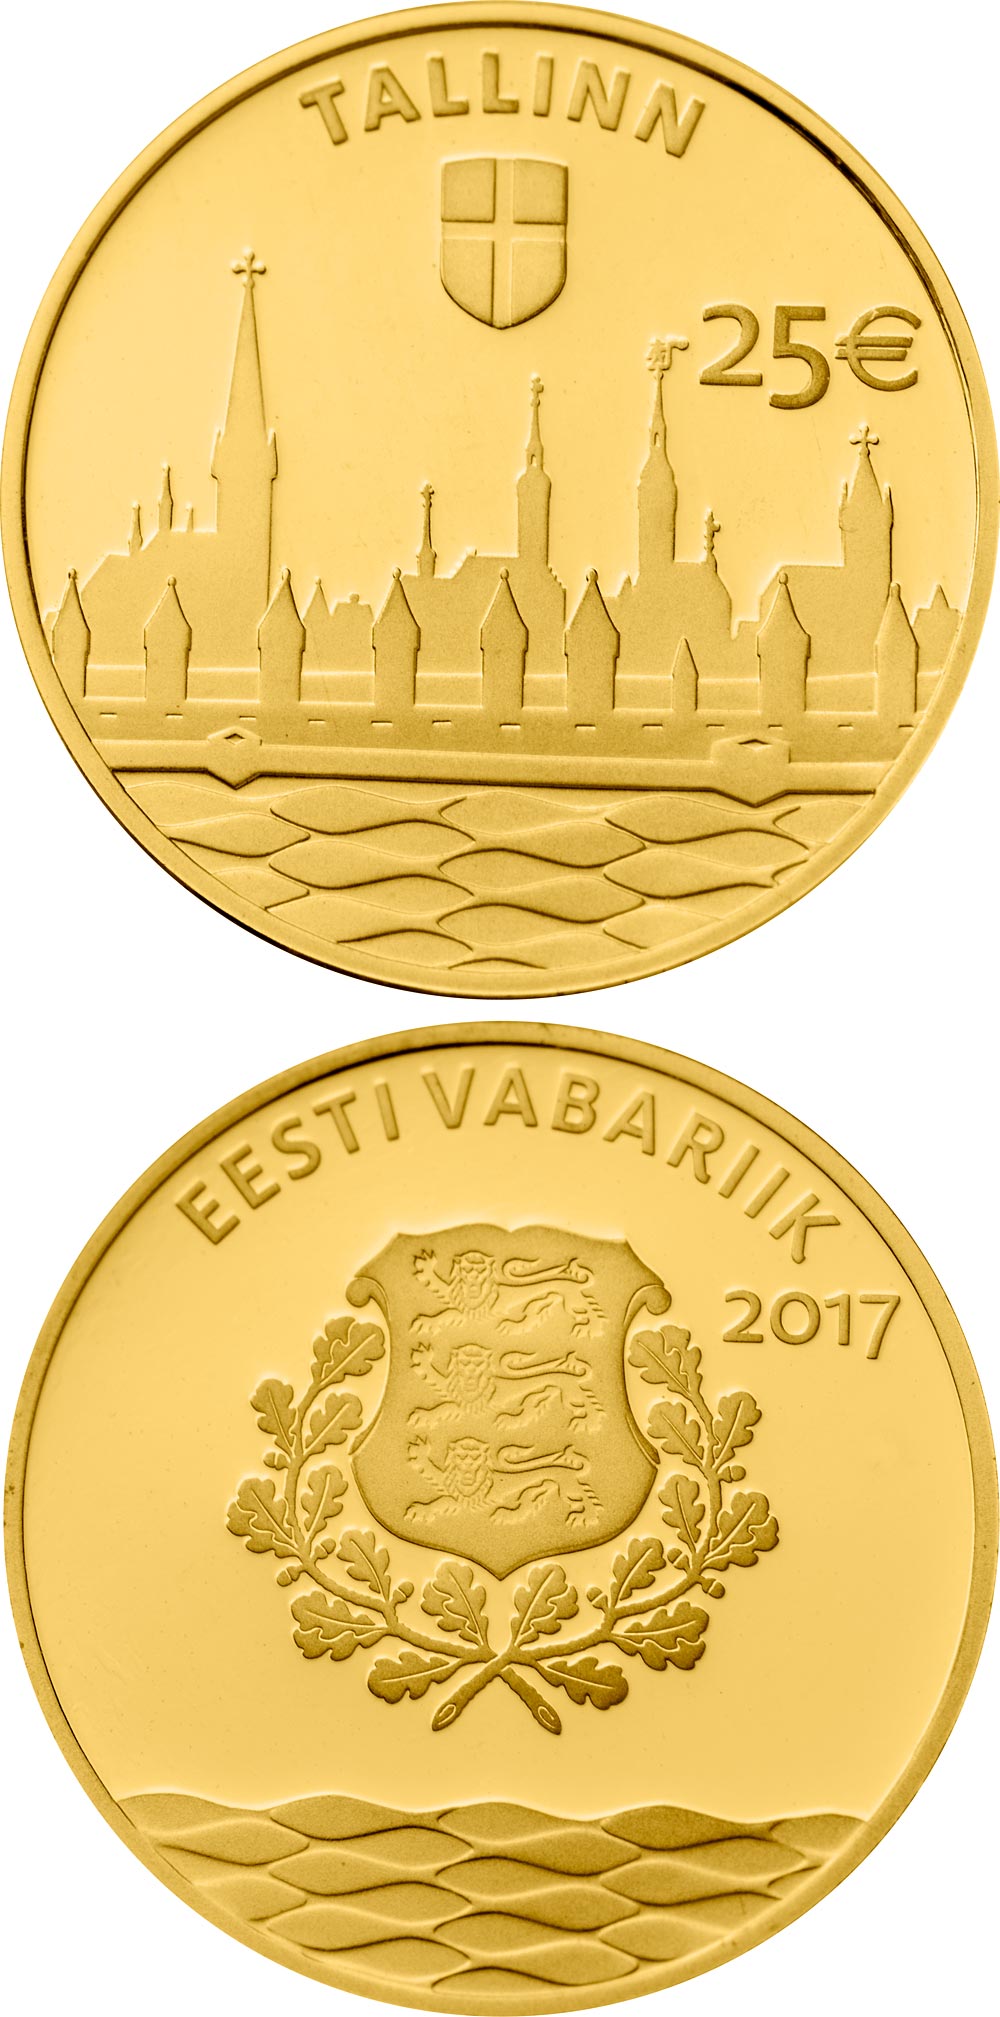 Image of 25 euro coin - Hanseatic Tallinn | Estonia 2017.  The Gold coin is of Proof quality.